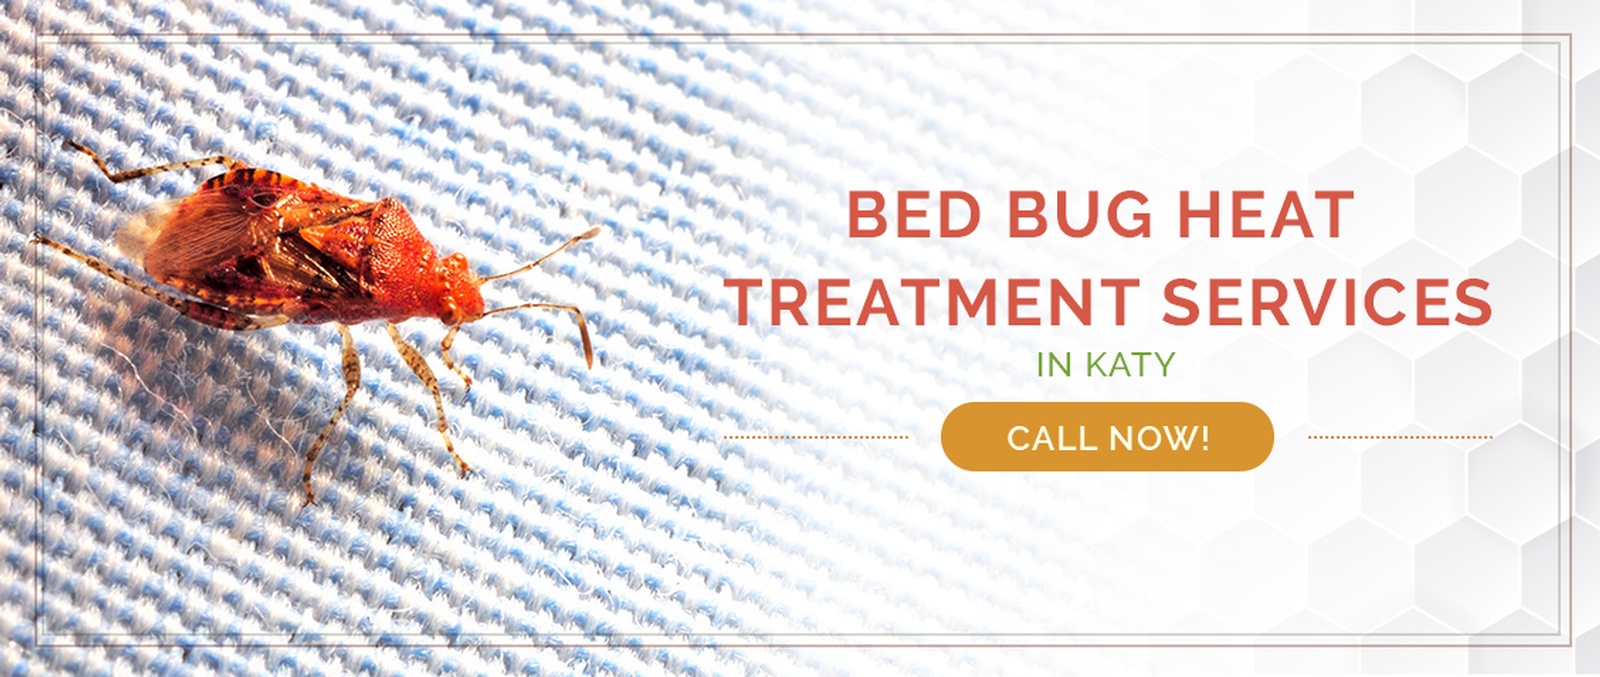 Katy Bed Bug Treatment / Heater Rental Services by Houston Bed Bug Heaters